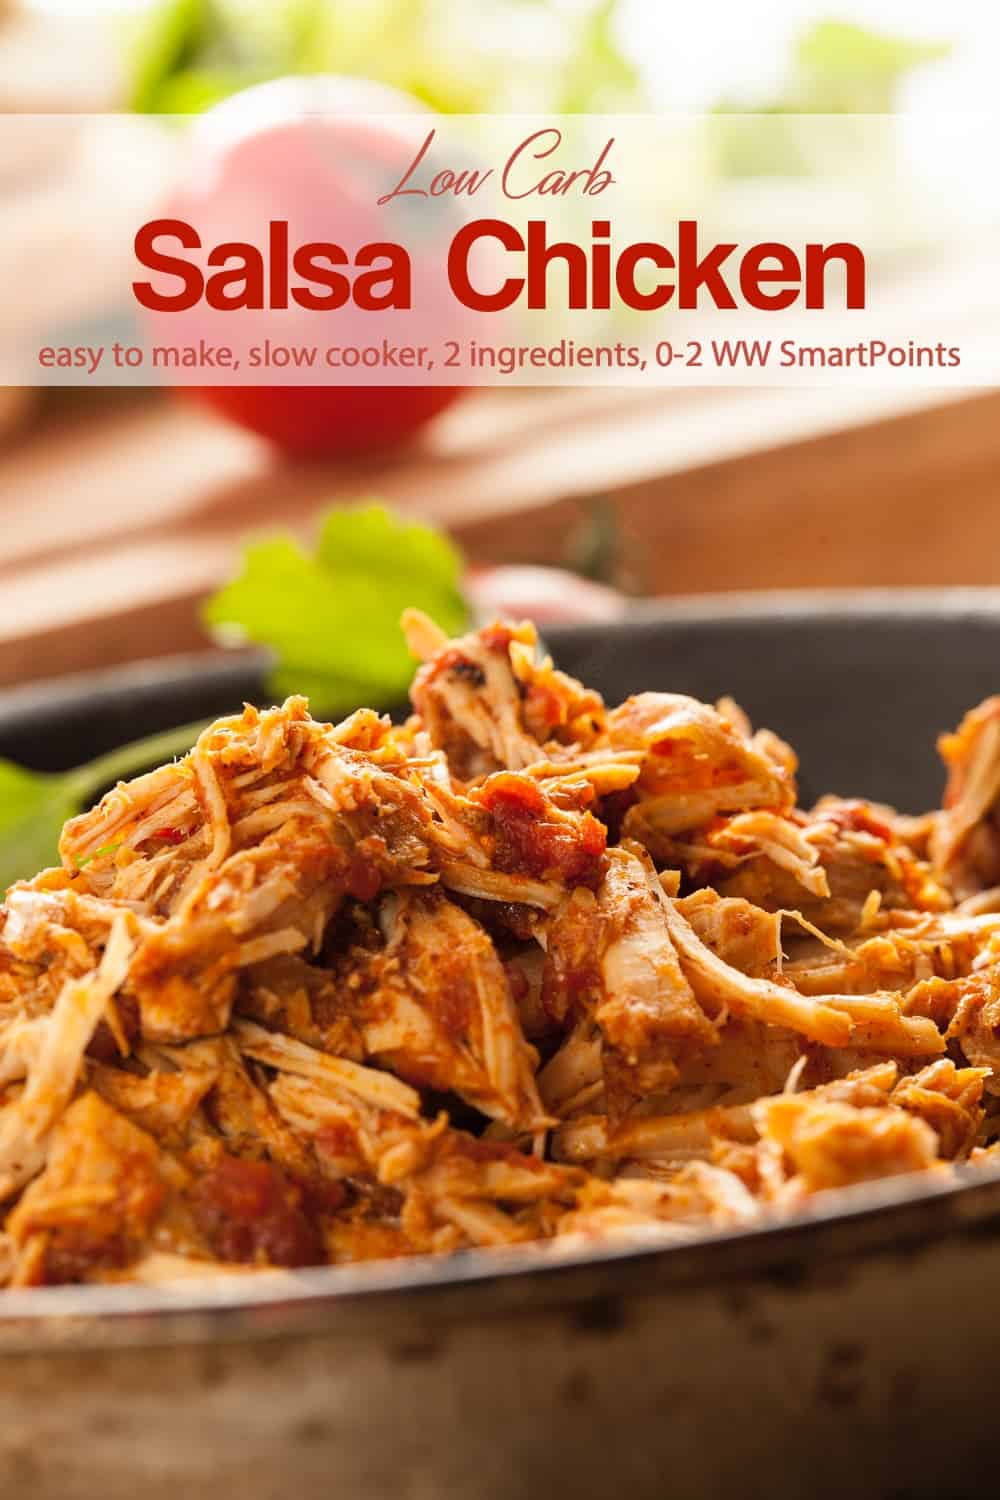 Pan with Shredded Salsa Chicken.